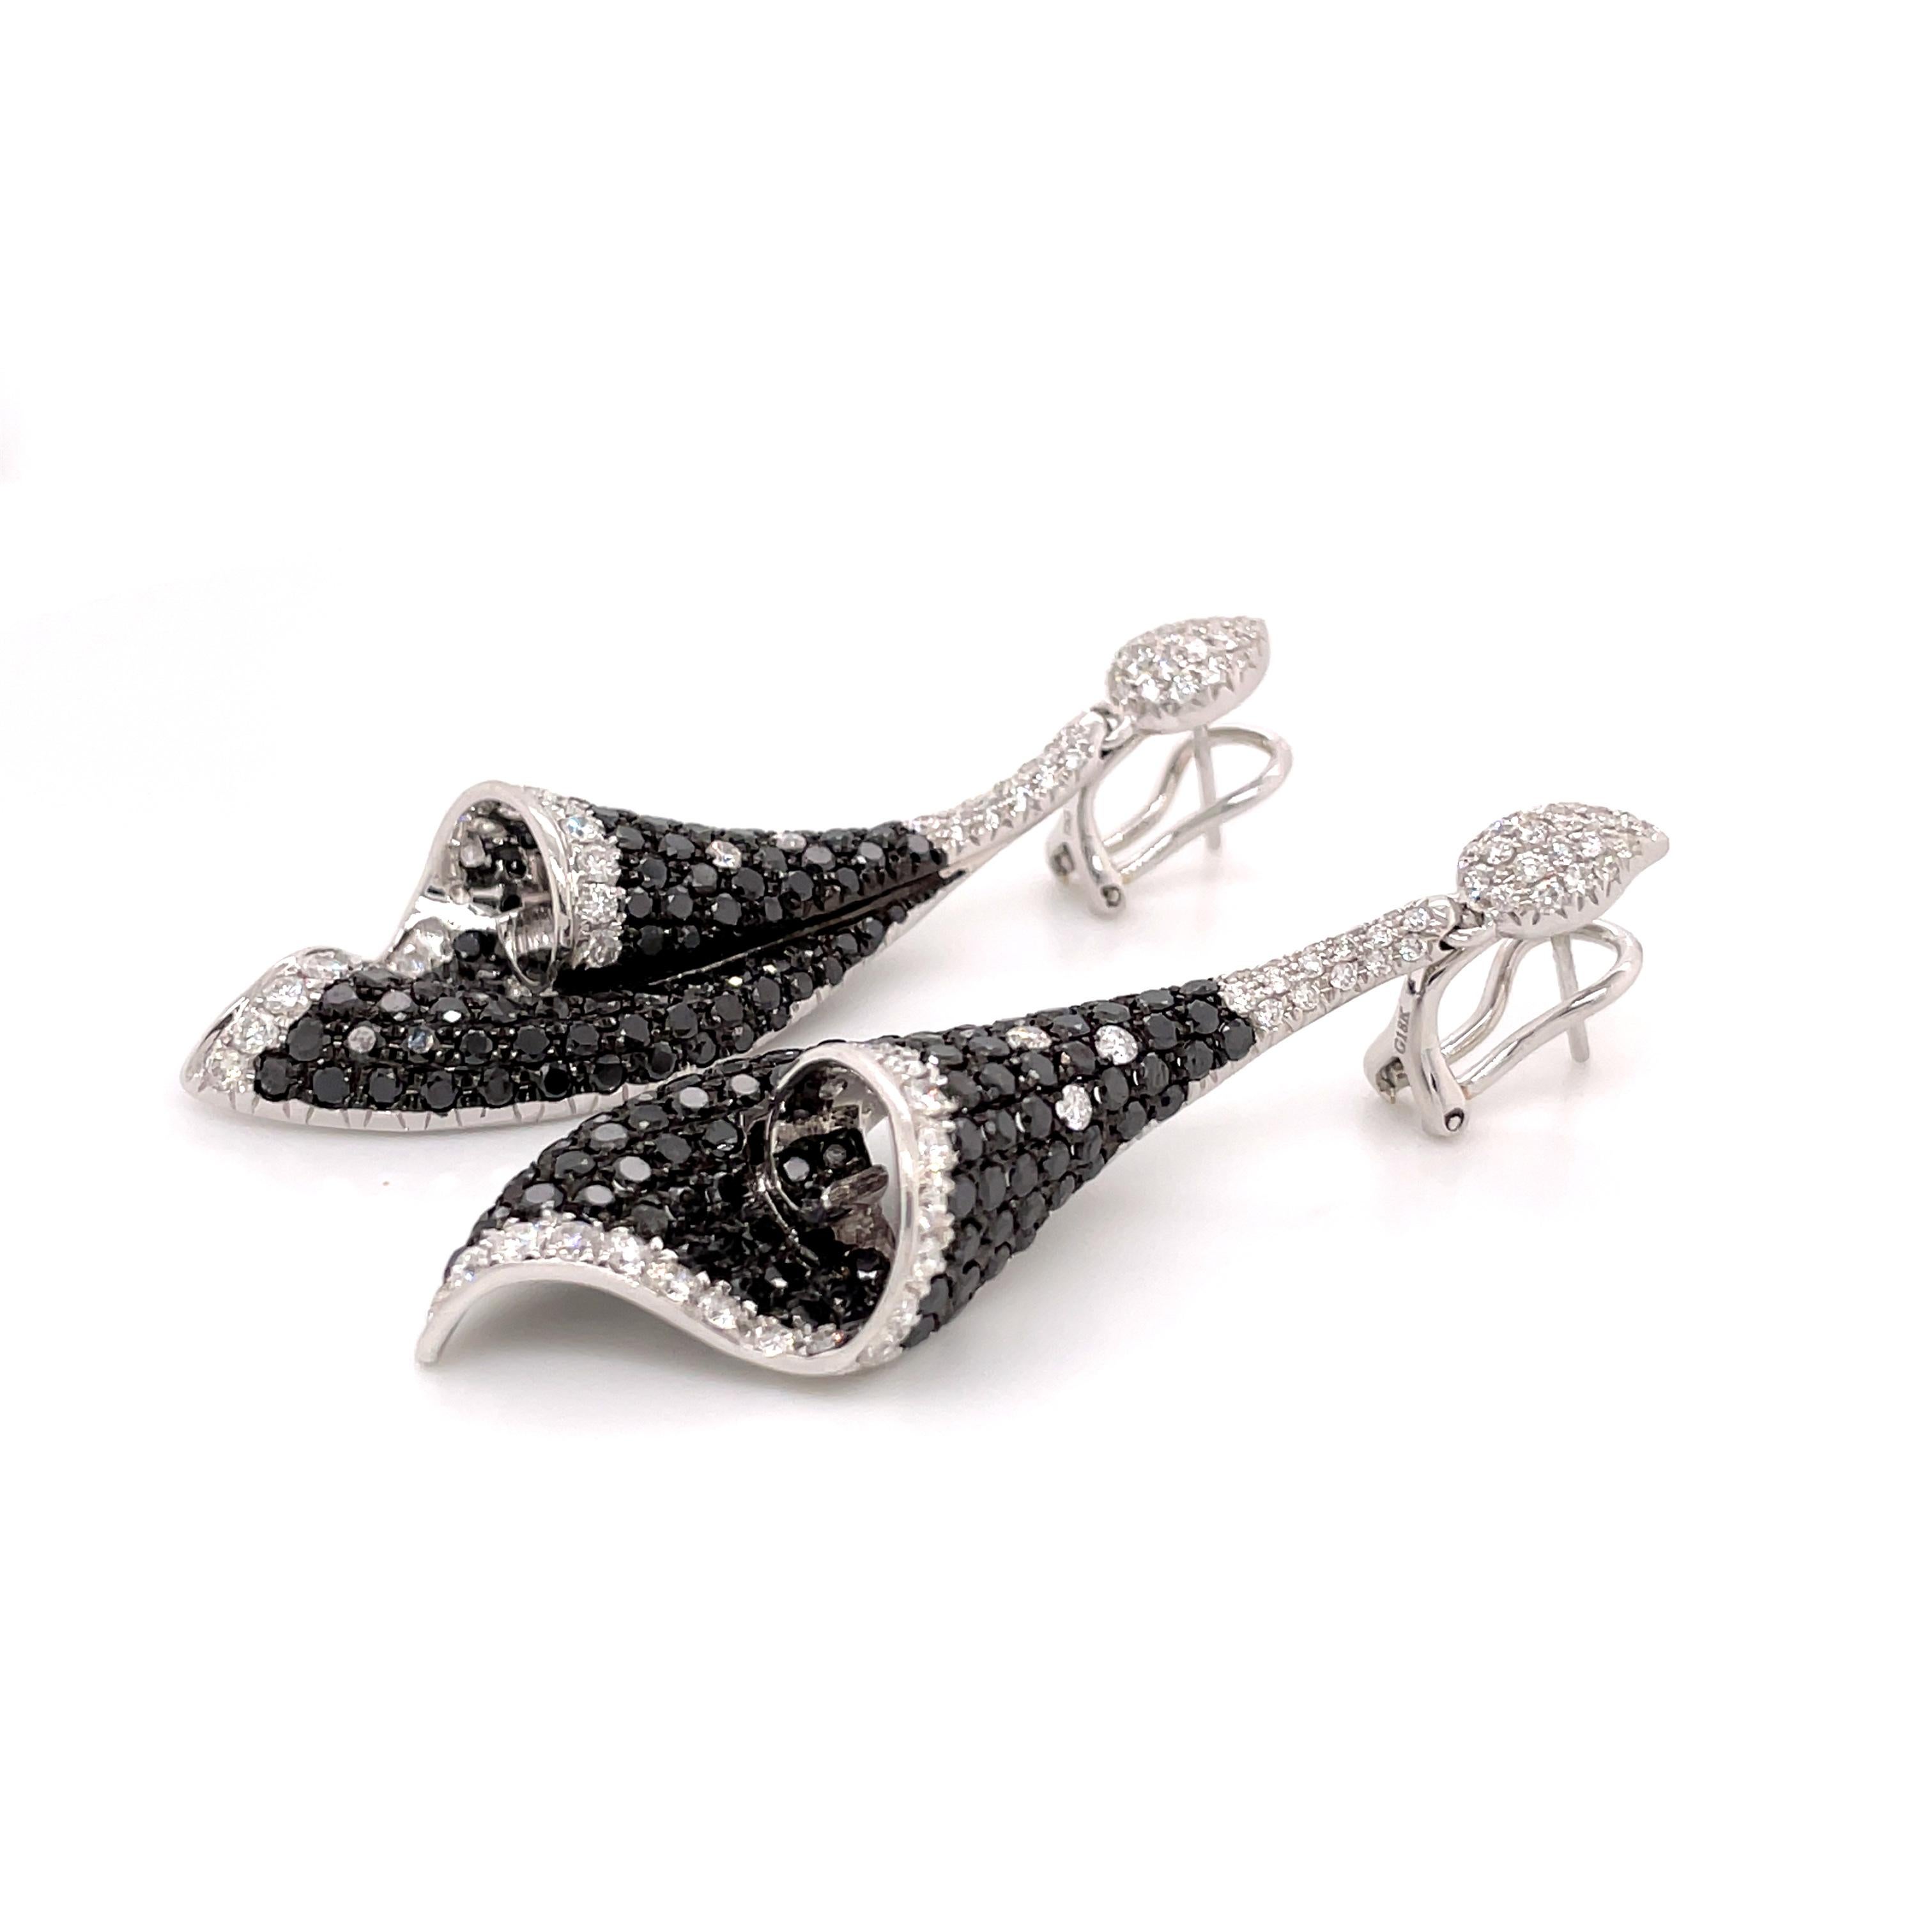 These elegant conch shell earrings showcase a striking contrast between black and white diamonds, creating a harmonious blend of sophistication and allure. The outer curves of the conch shell are studded with shimmering white diamonds, adding a